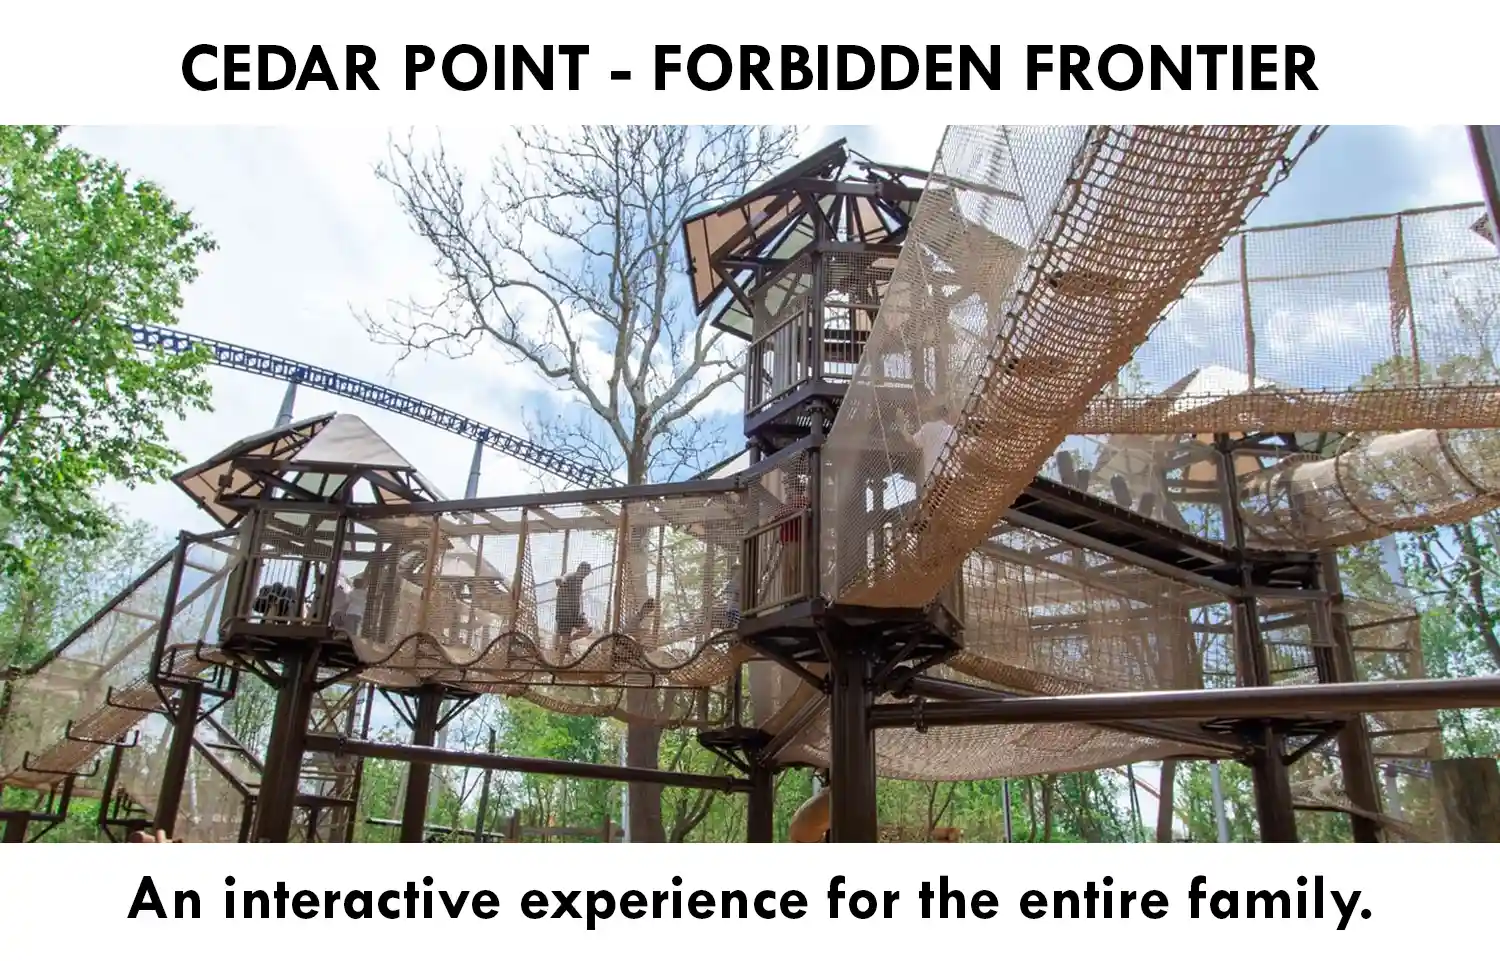 Cedar Point the Ultimate Guide for Families - Tips & Tricks - Forbidden Frontier